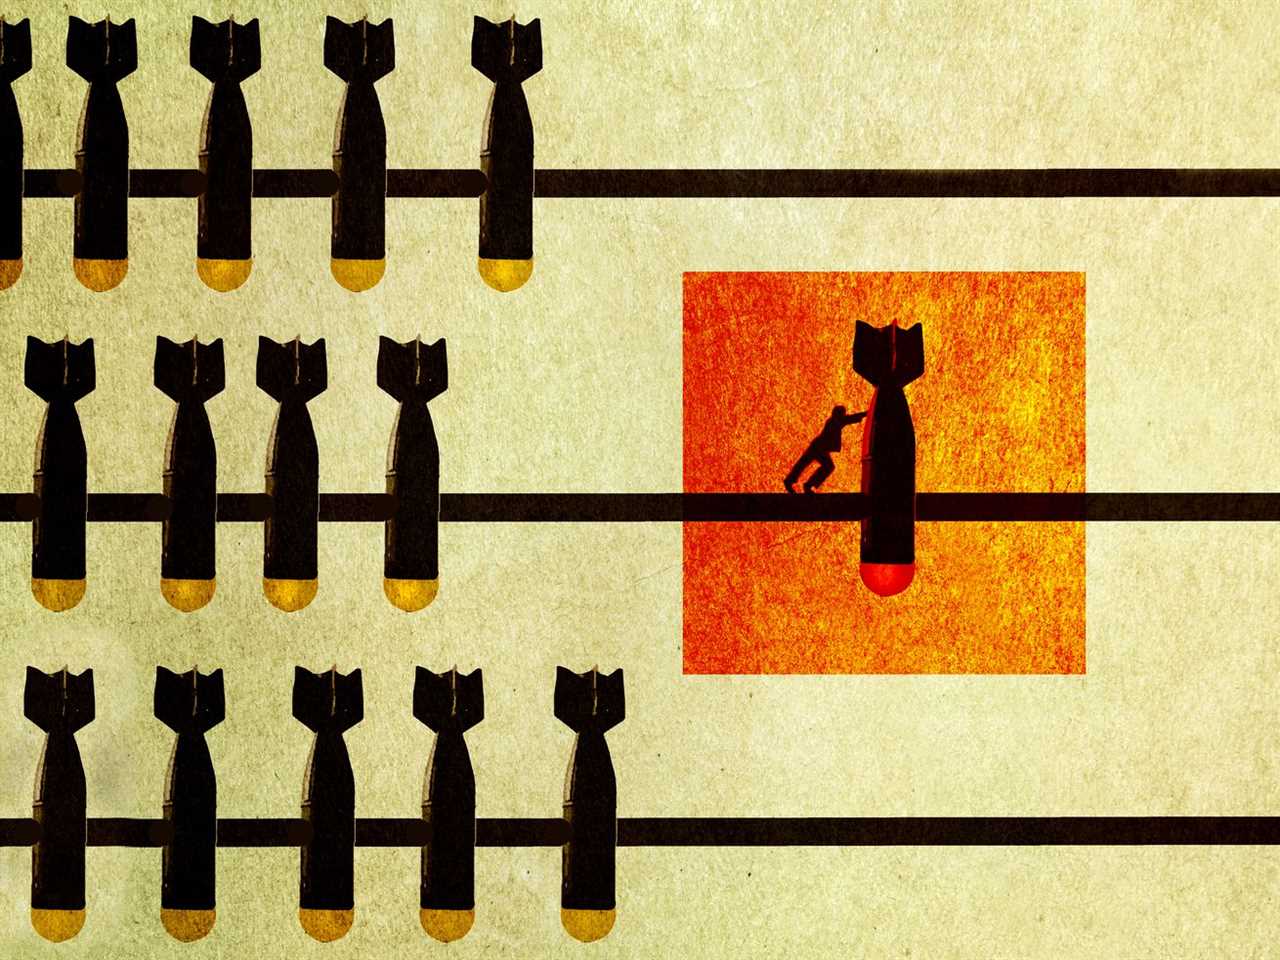 illustration of a person pushing bombs along an abacus